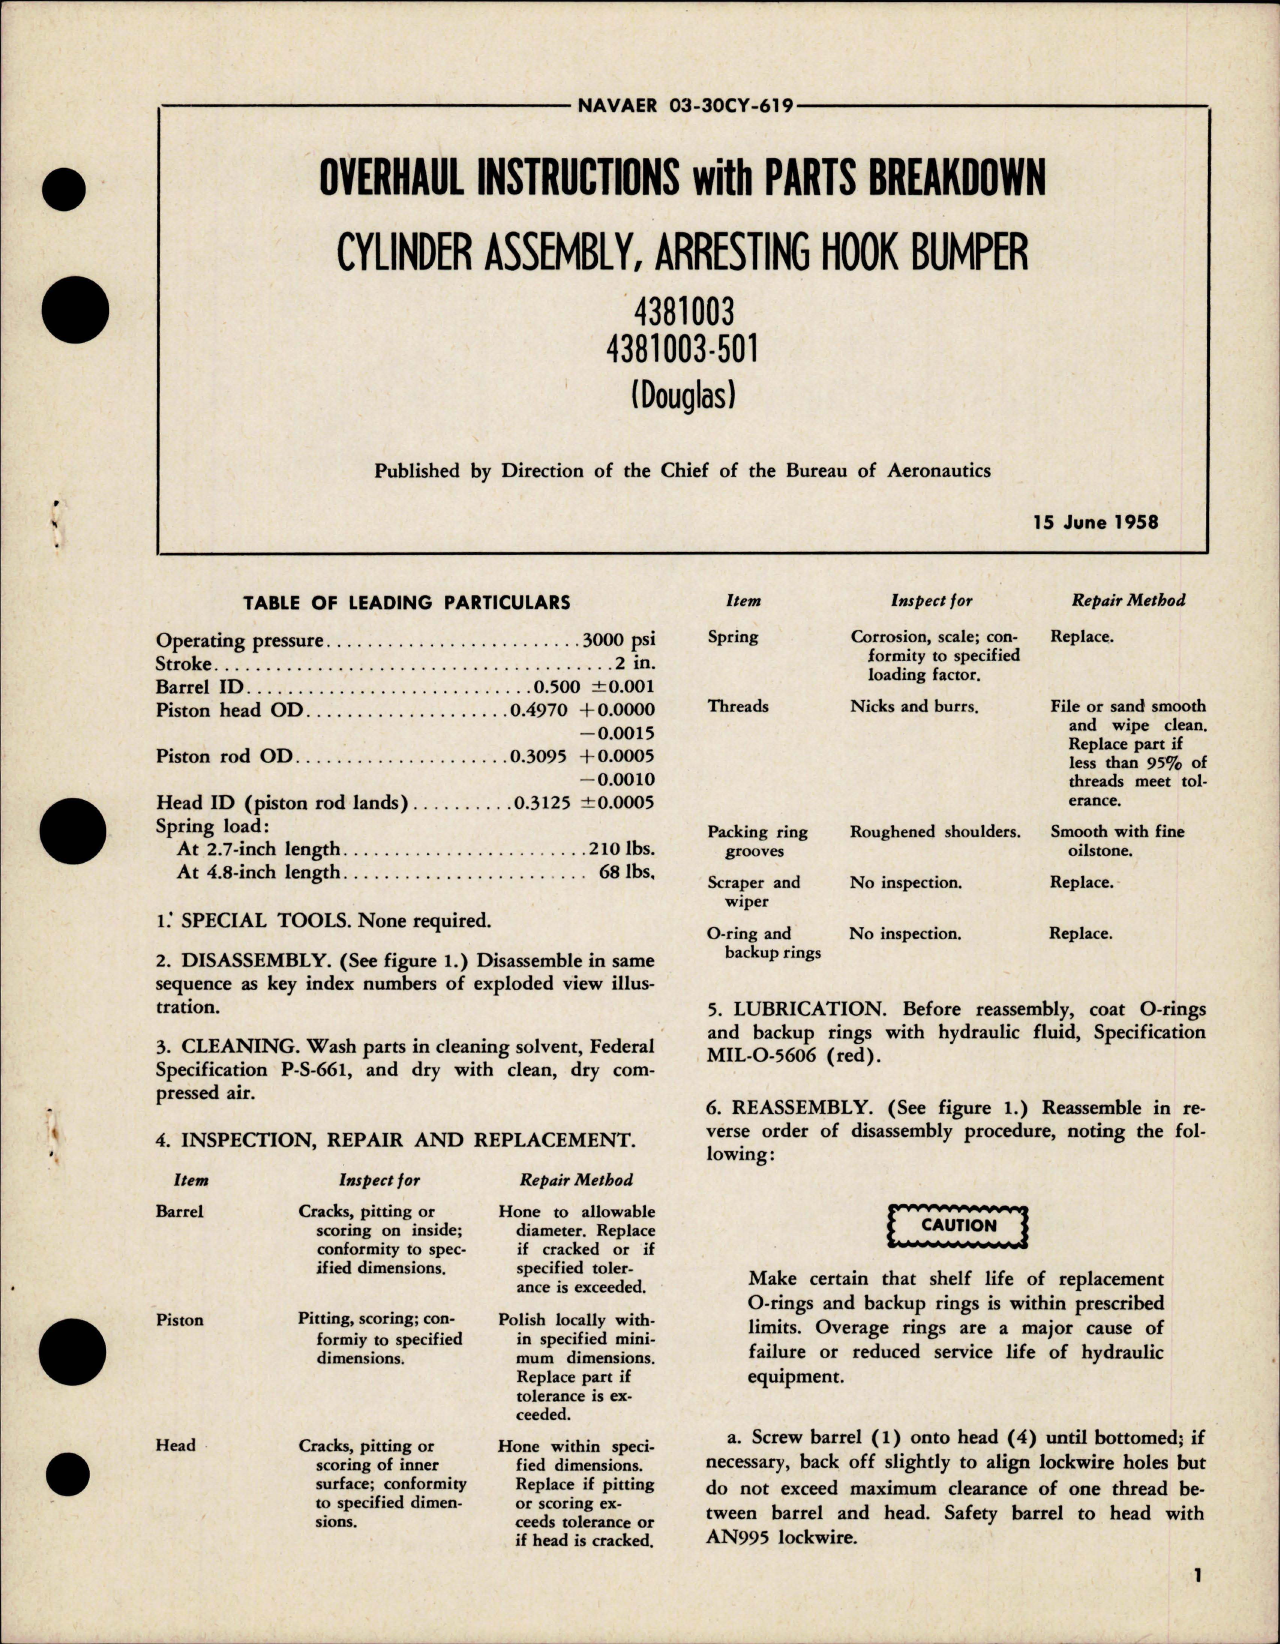 Sample page 1 from AirCorps Library document: Overhaul Instructions with Parts for Arresting Hook Bumper Cylinder Assembly - 4381003, 4381003-501